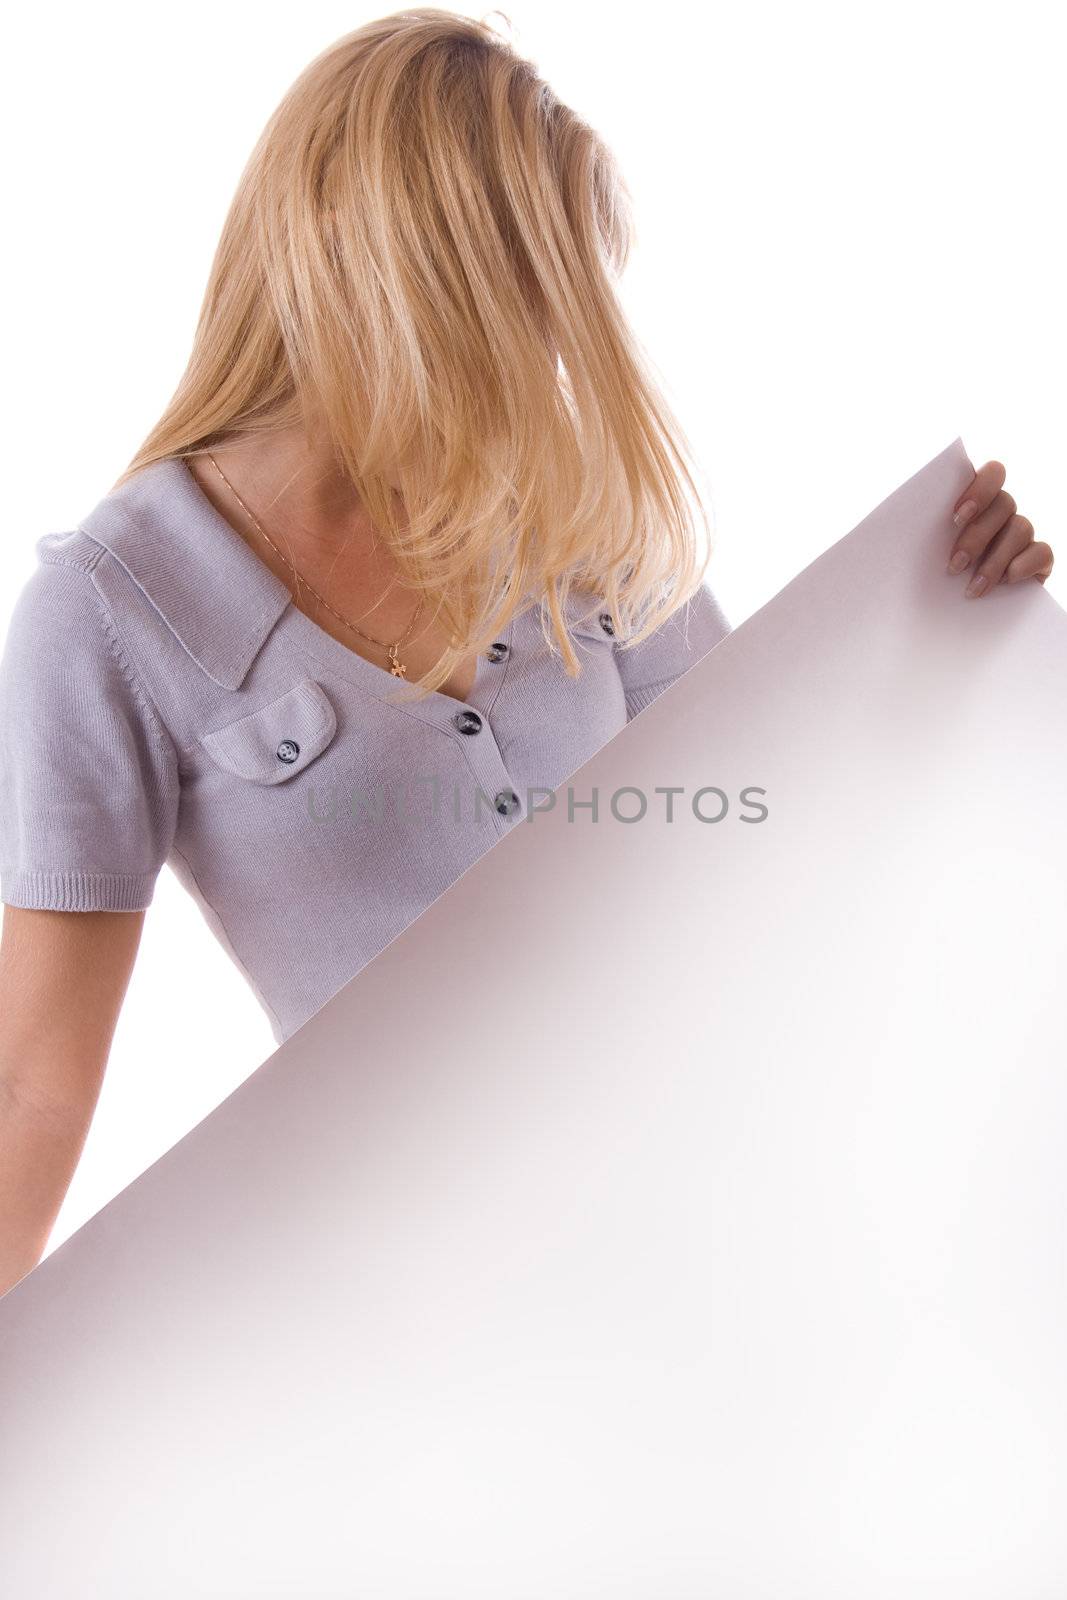 Blonde woman with white sheet of paper. Isolated. #1 by Amidos